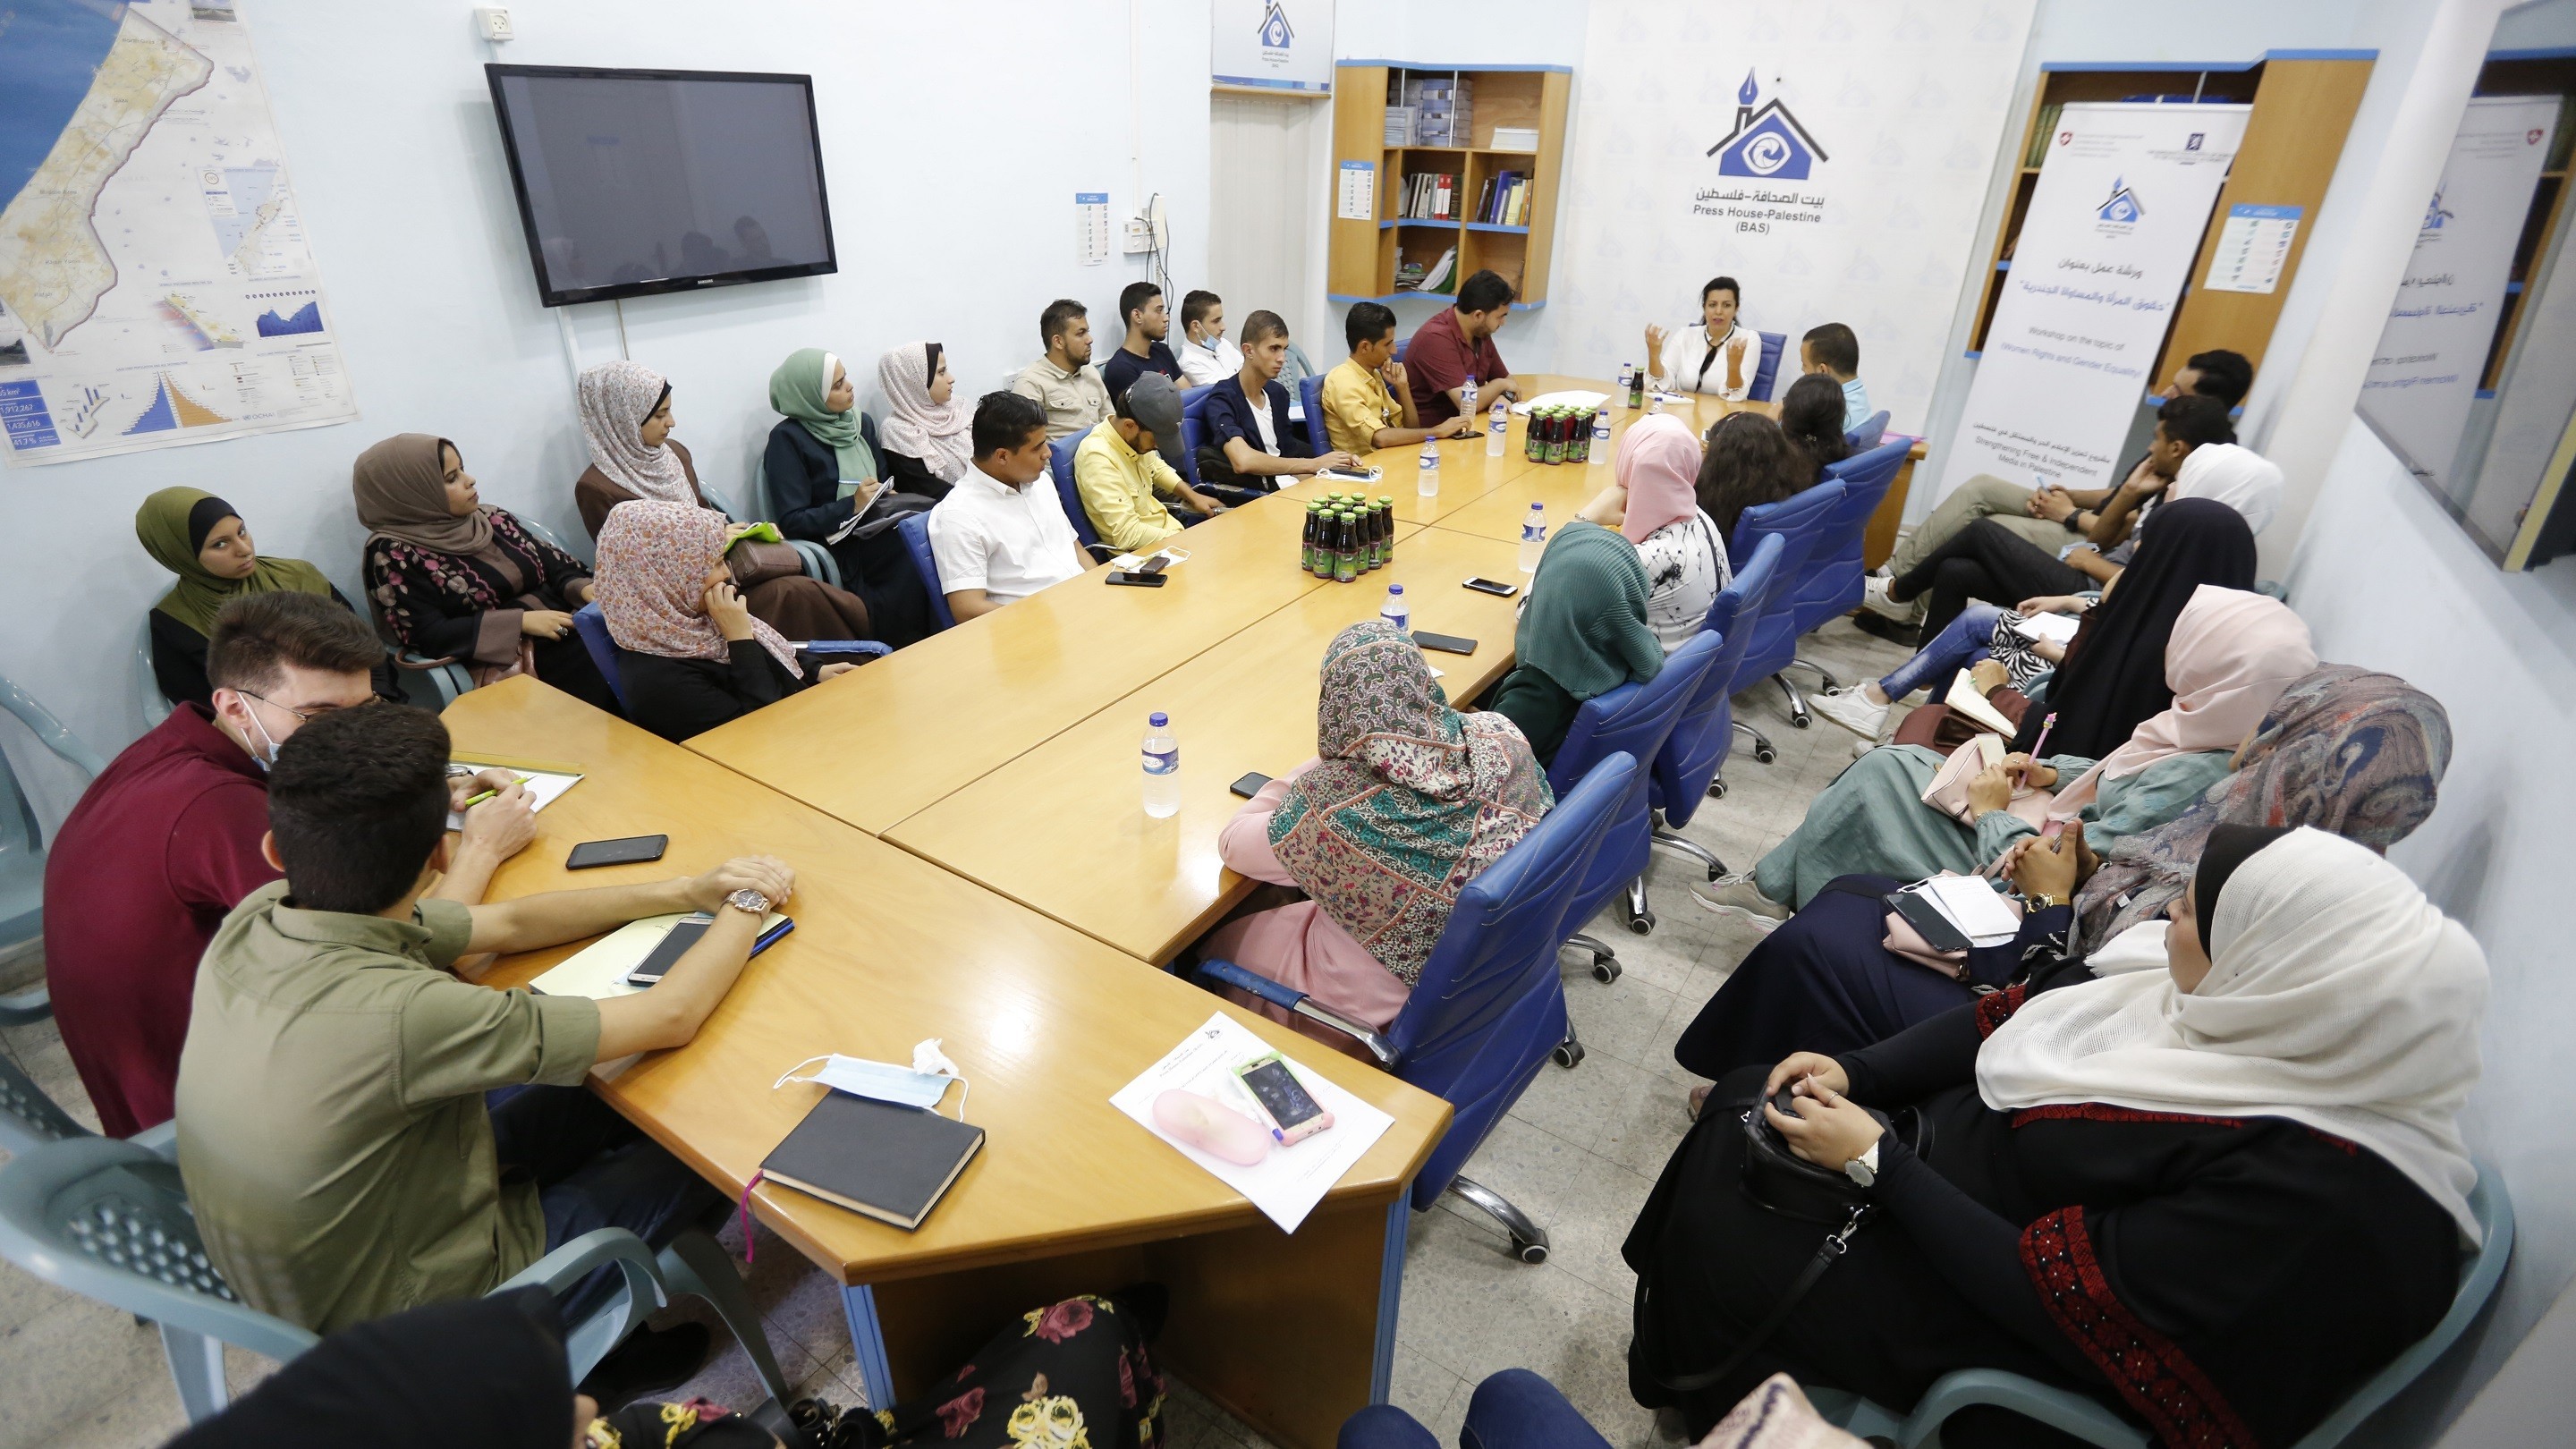 Press House organizes a workshop on the topic of  "Women's Rights and Gender Equality”